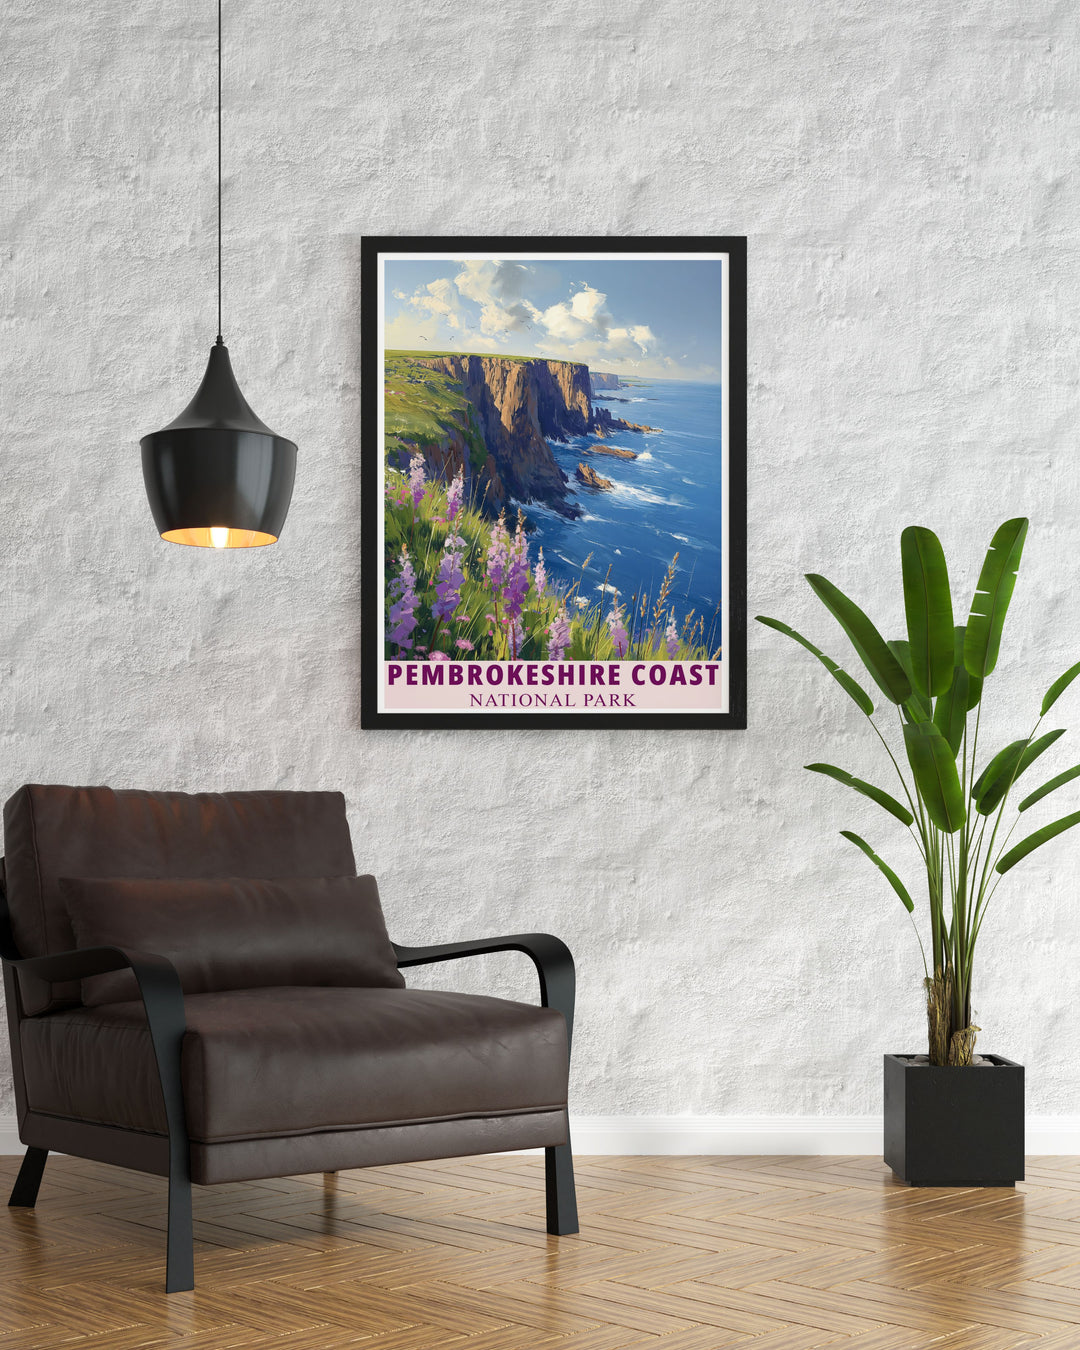 Coastal cliffs prints capturing the dramatic beauty of Pembrokeshire Wales with vintage travel art style showcasing the natural wonders of UK national parks ideal for enhancing your home decor or as a thoughtful gift for travel enthusiasts.